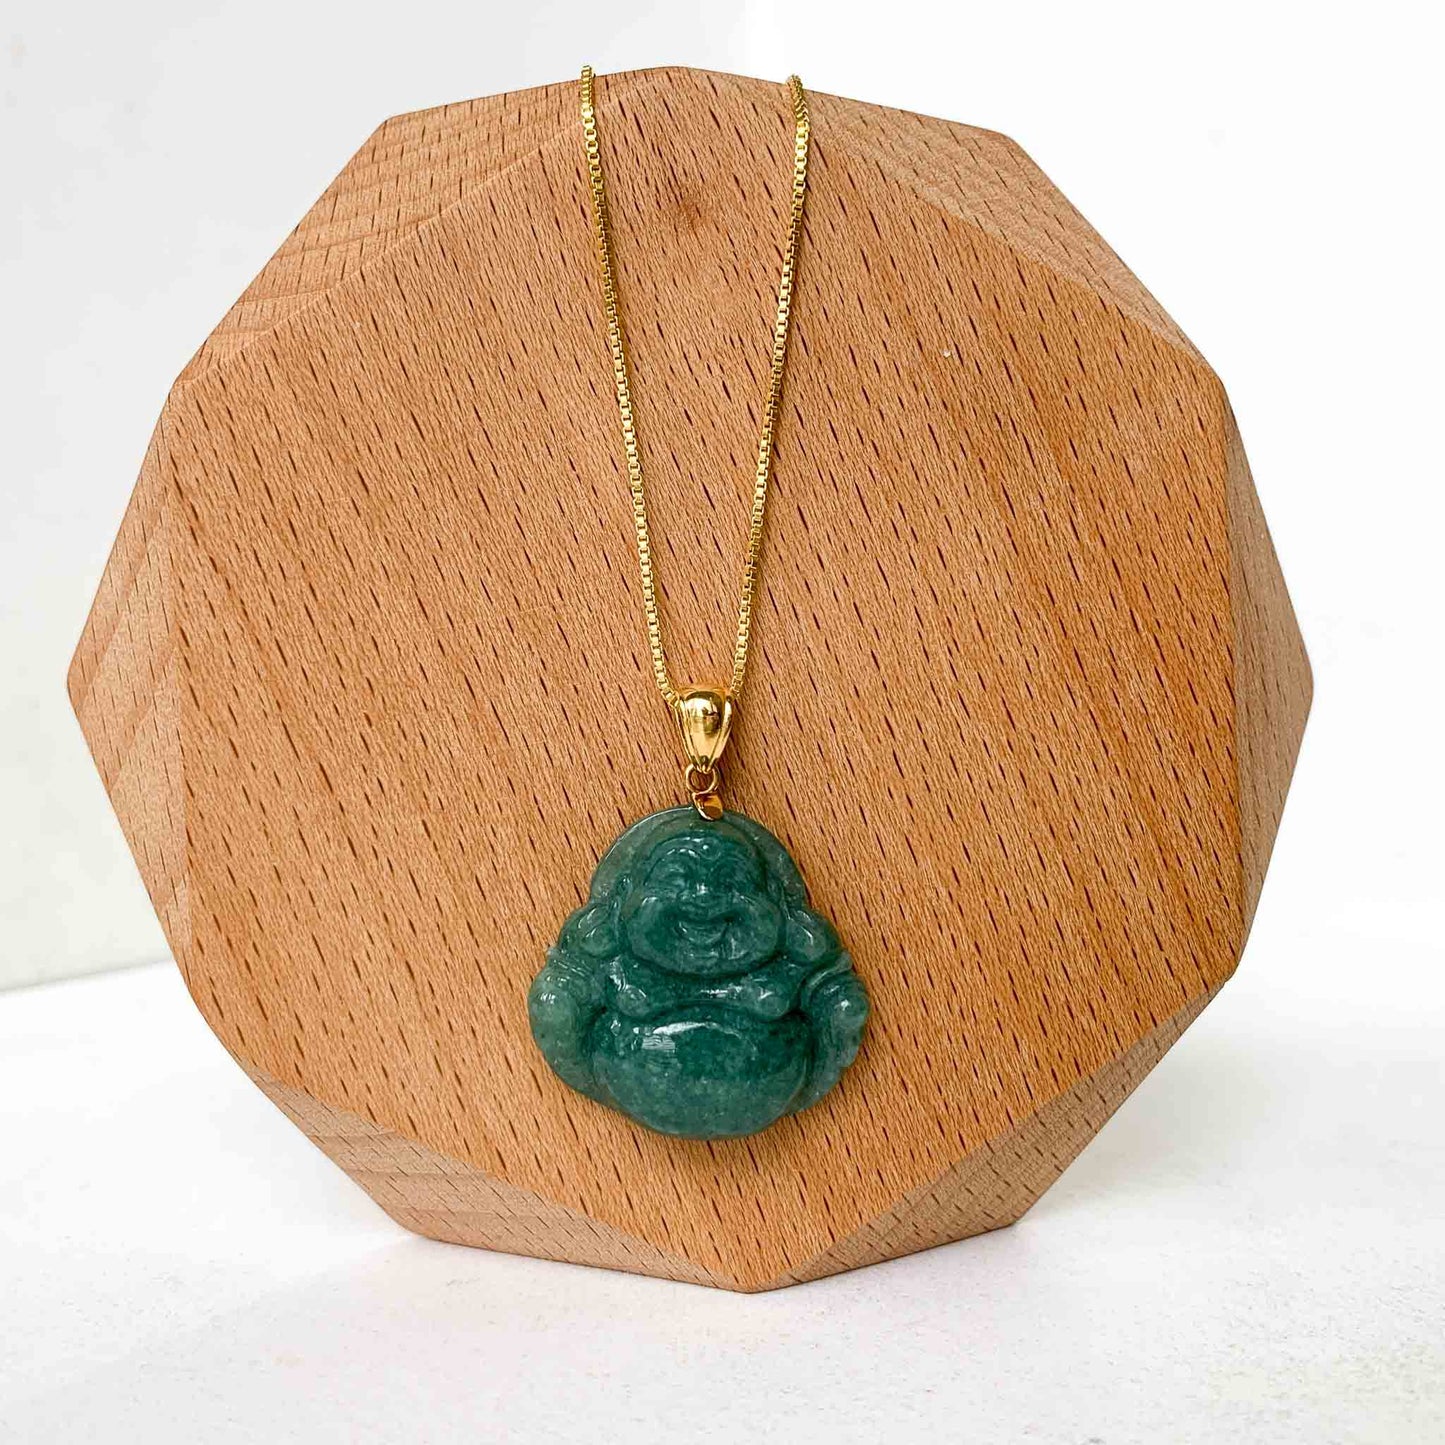 Green Happy Buddha Jadeite Jade with 18K Solid Gold Pendant, SHWQ-0423-1682304755